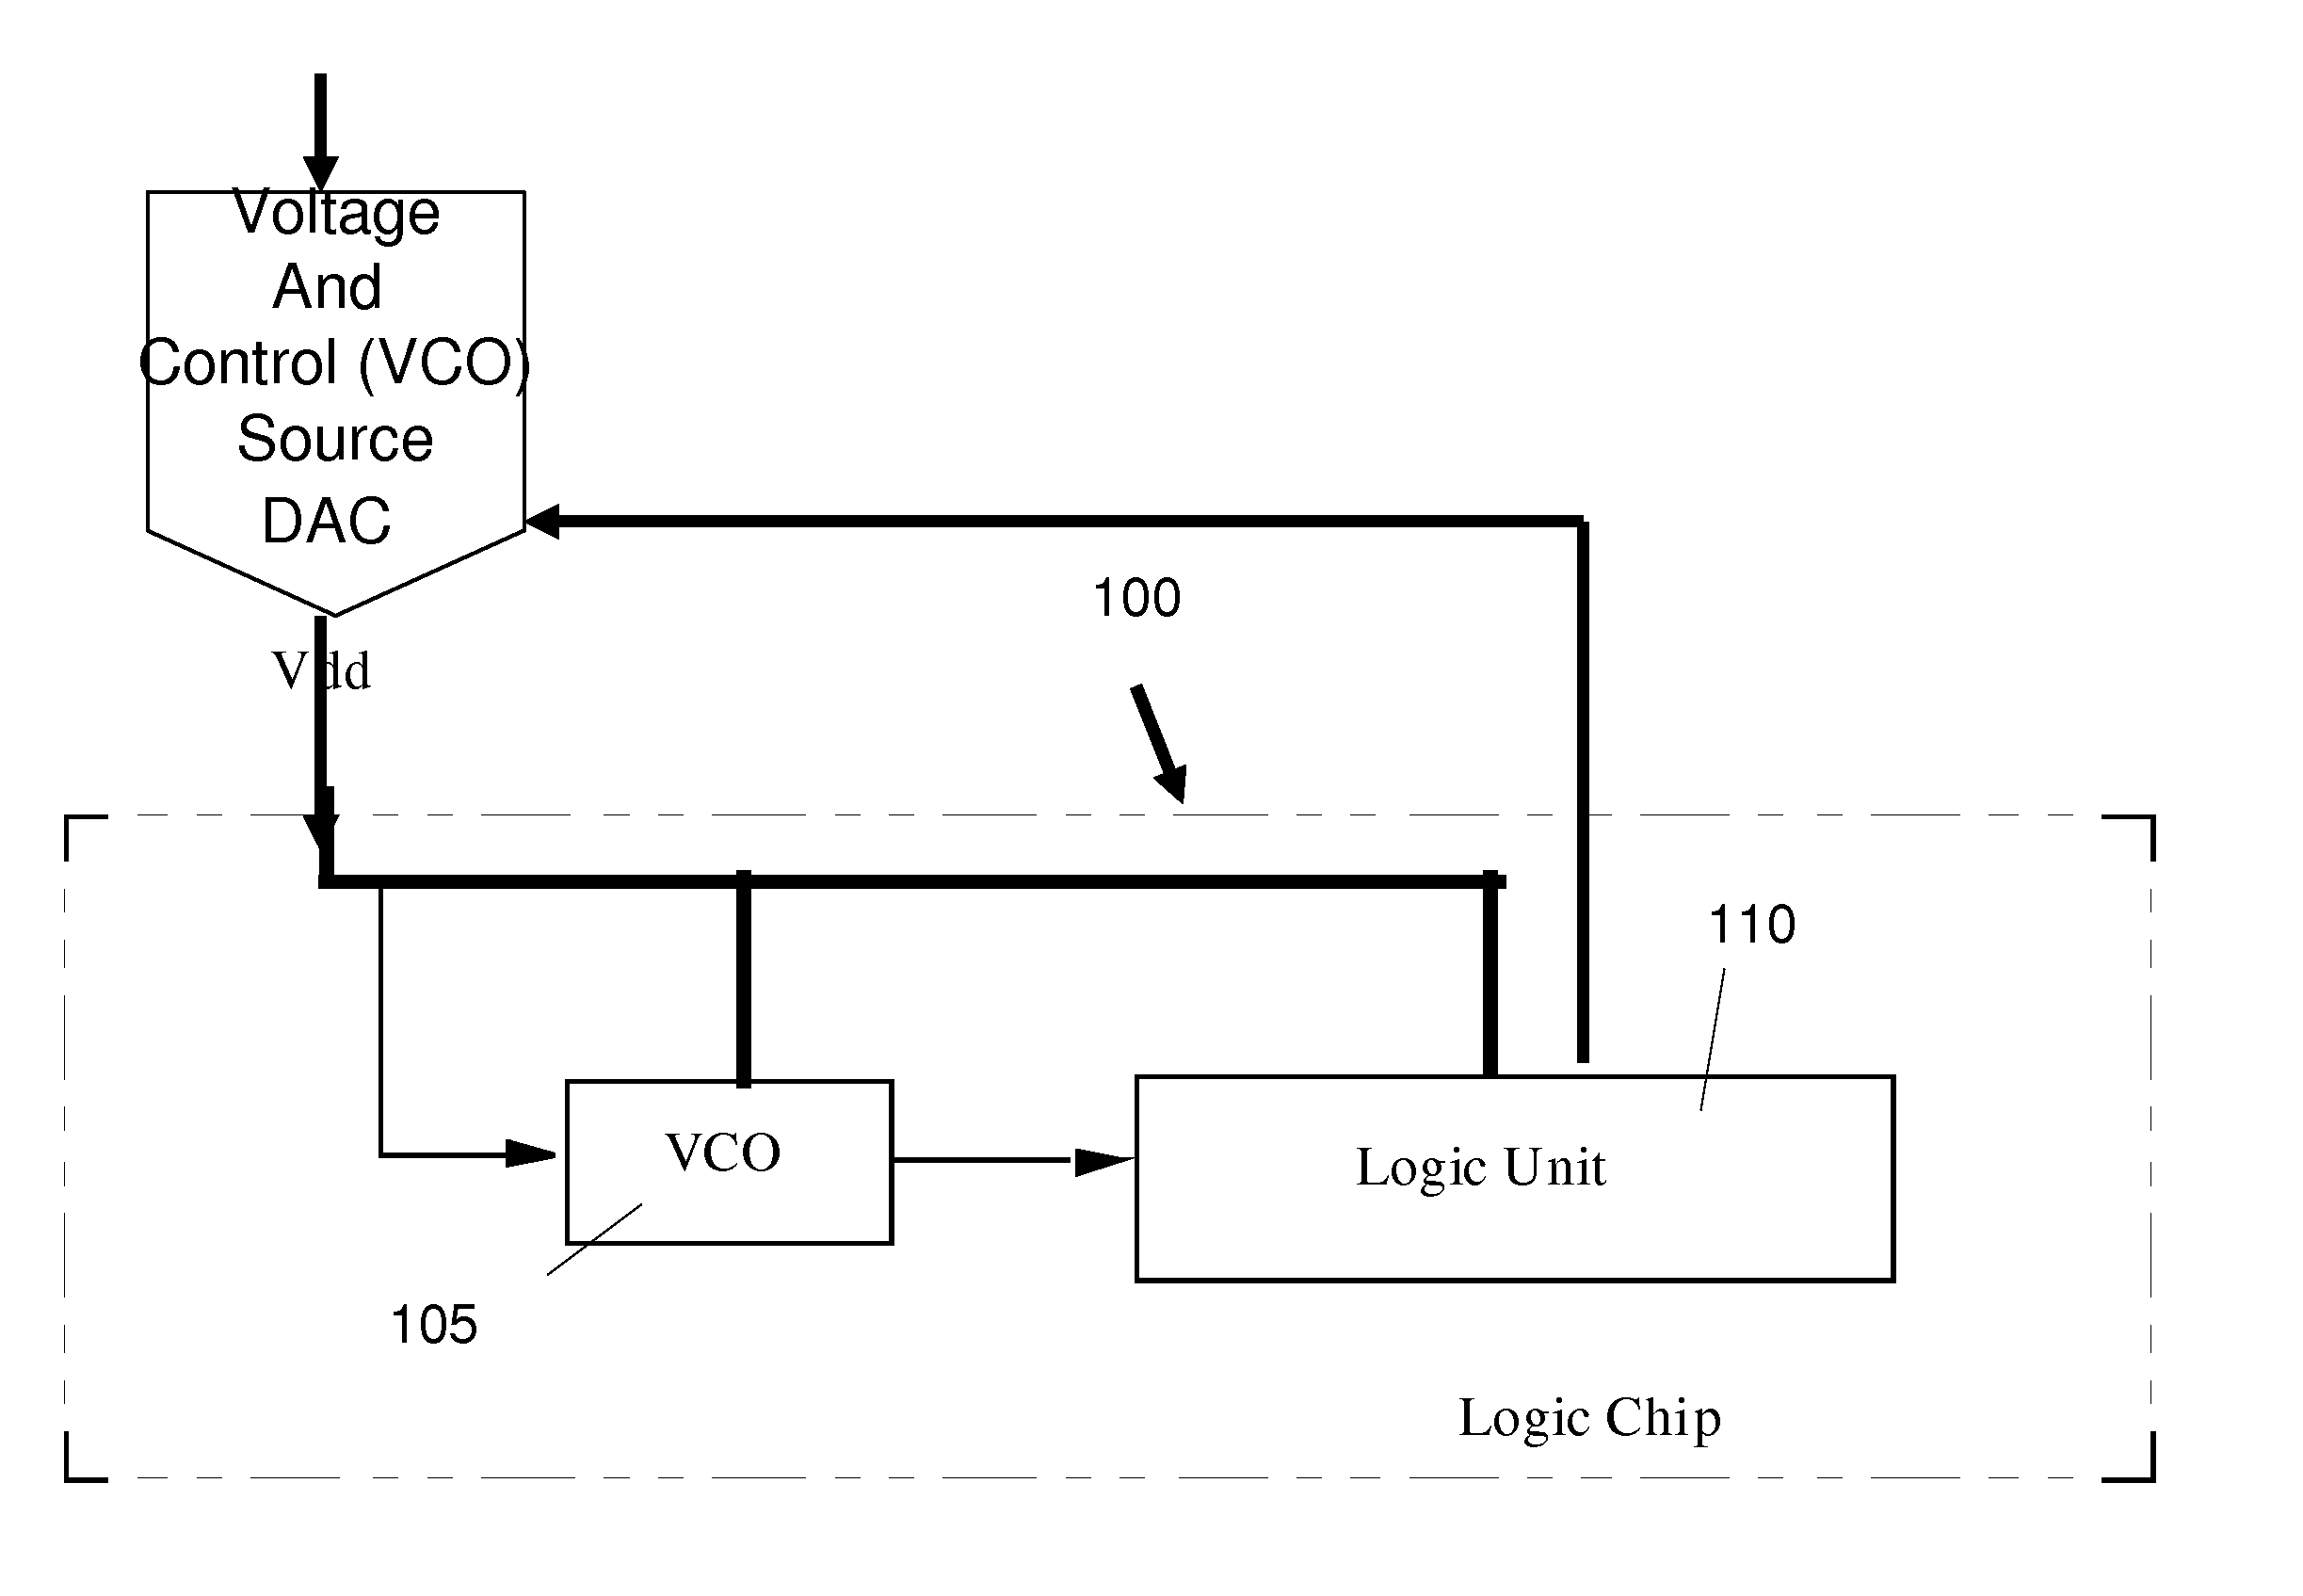 Power management architecture and method of modulating oscillator frequency based on voltage supply